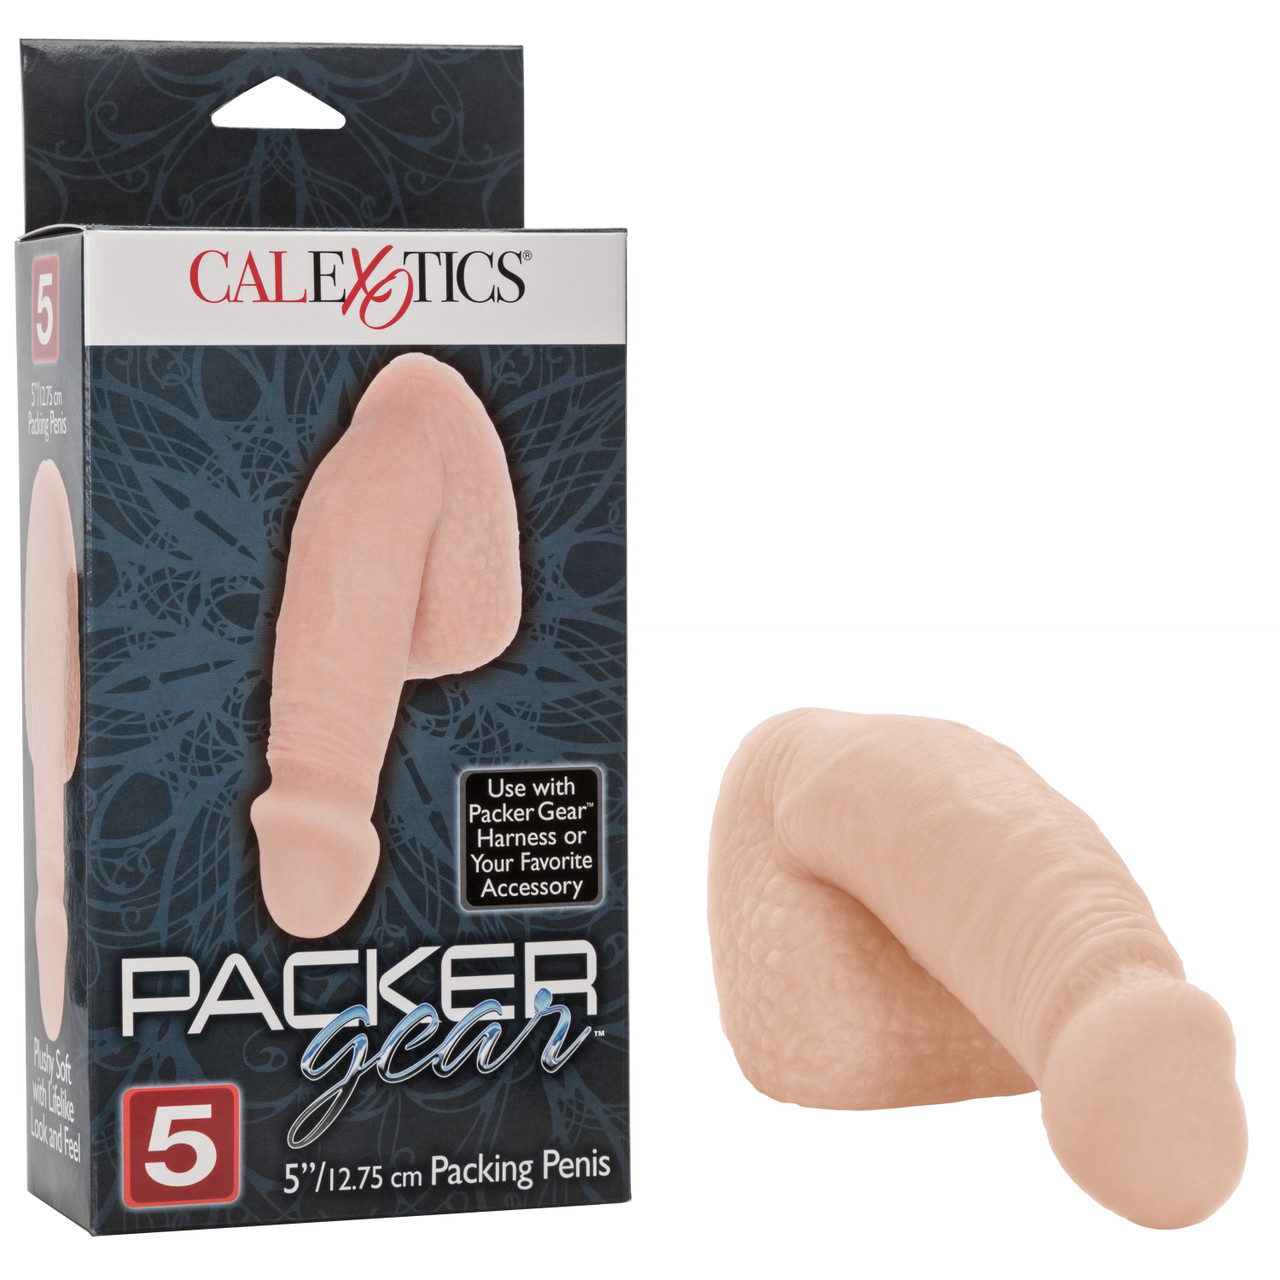 PACKER GEAR IVORY PACKING PENIS 5IN